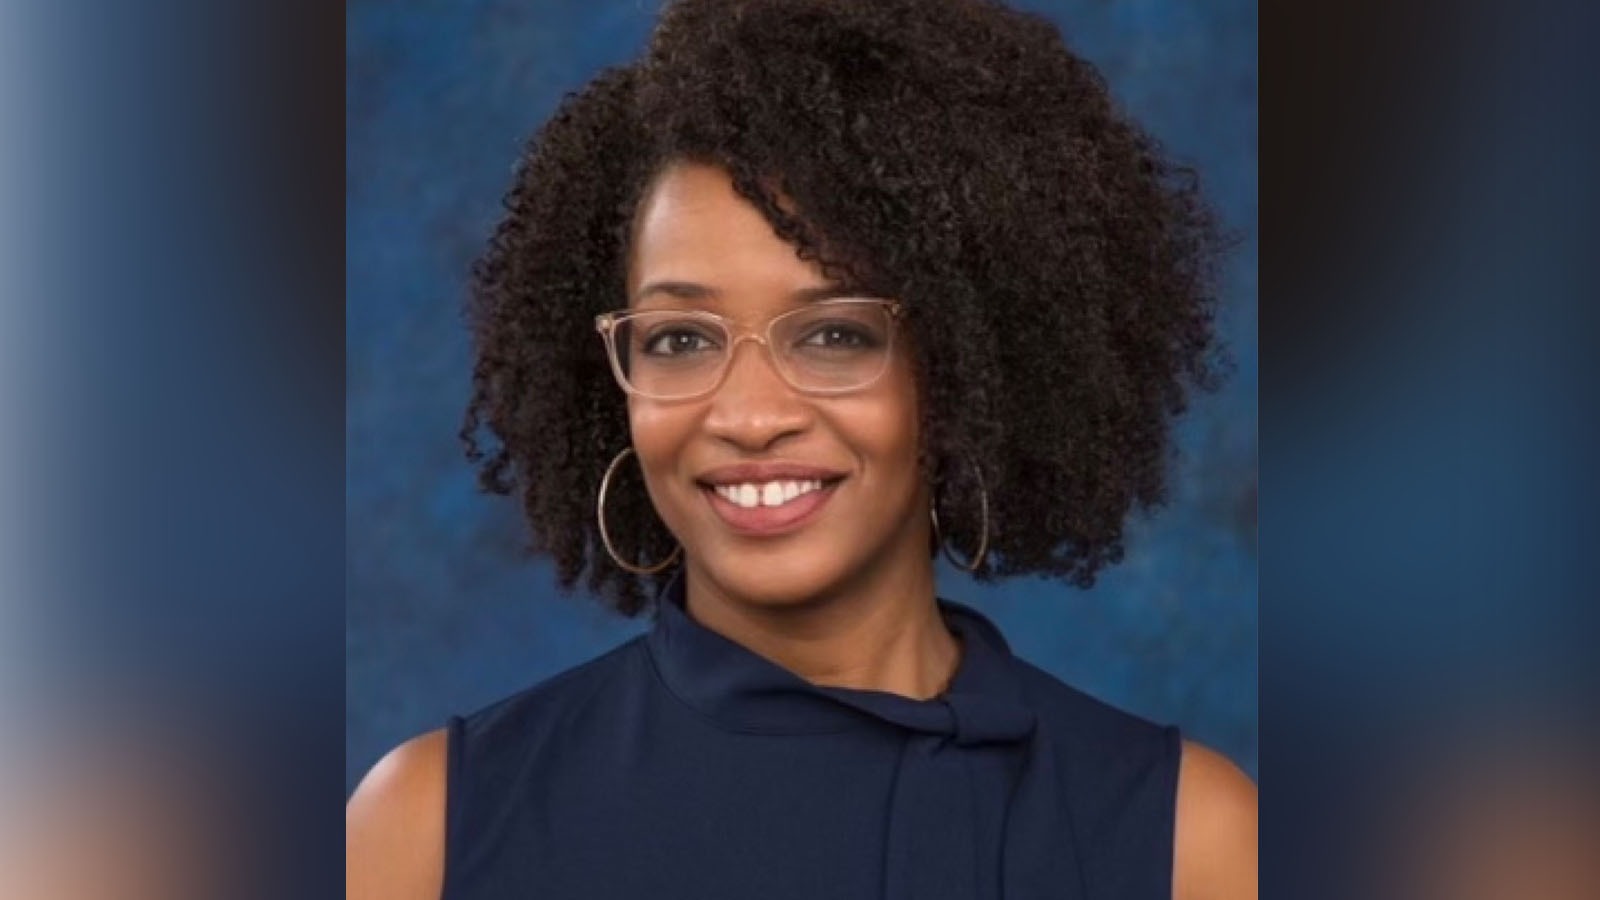 Tiana, an African American woman, sits smiling at the camera. She is wearing a sleeveless navy blue blouse, silver hoop earrings, and glasses with translucent beige frames.